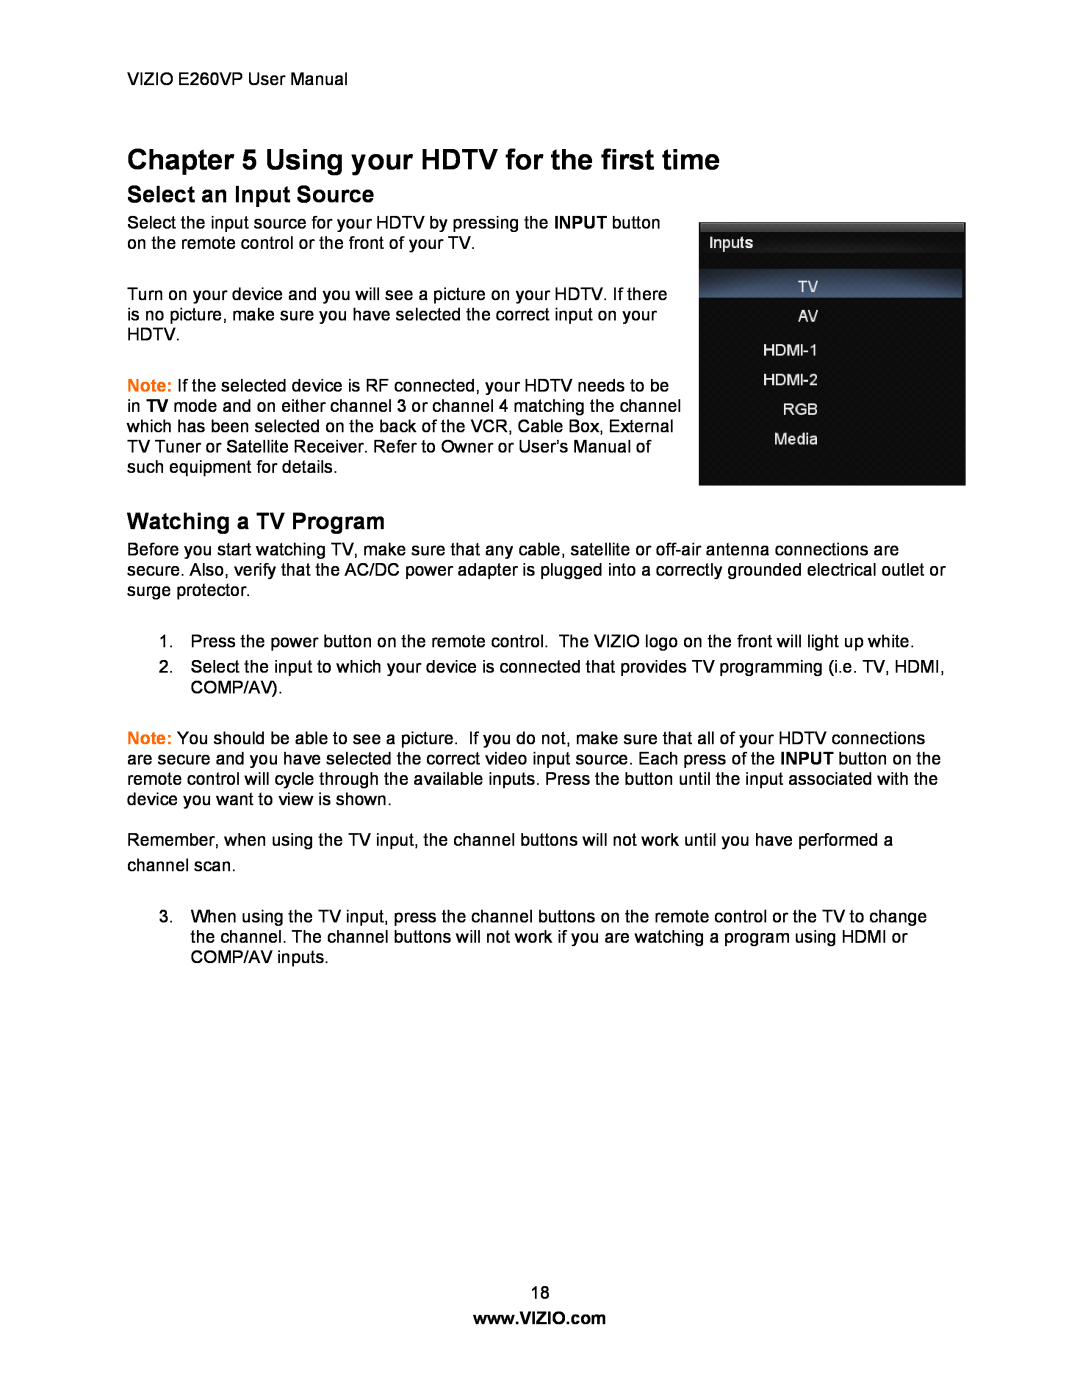 Vizio E260VP user manual Using your HDTV for the first time, Select an Input Source, Watching a TV Program 